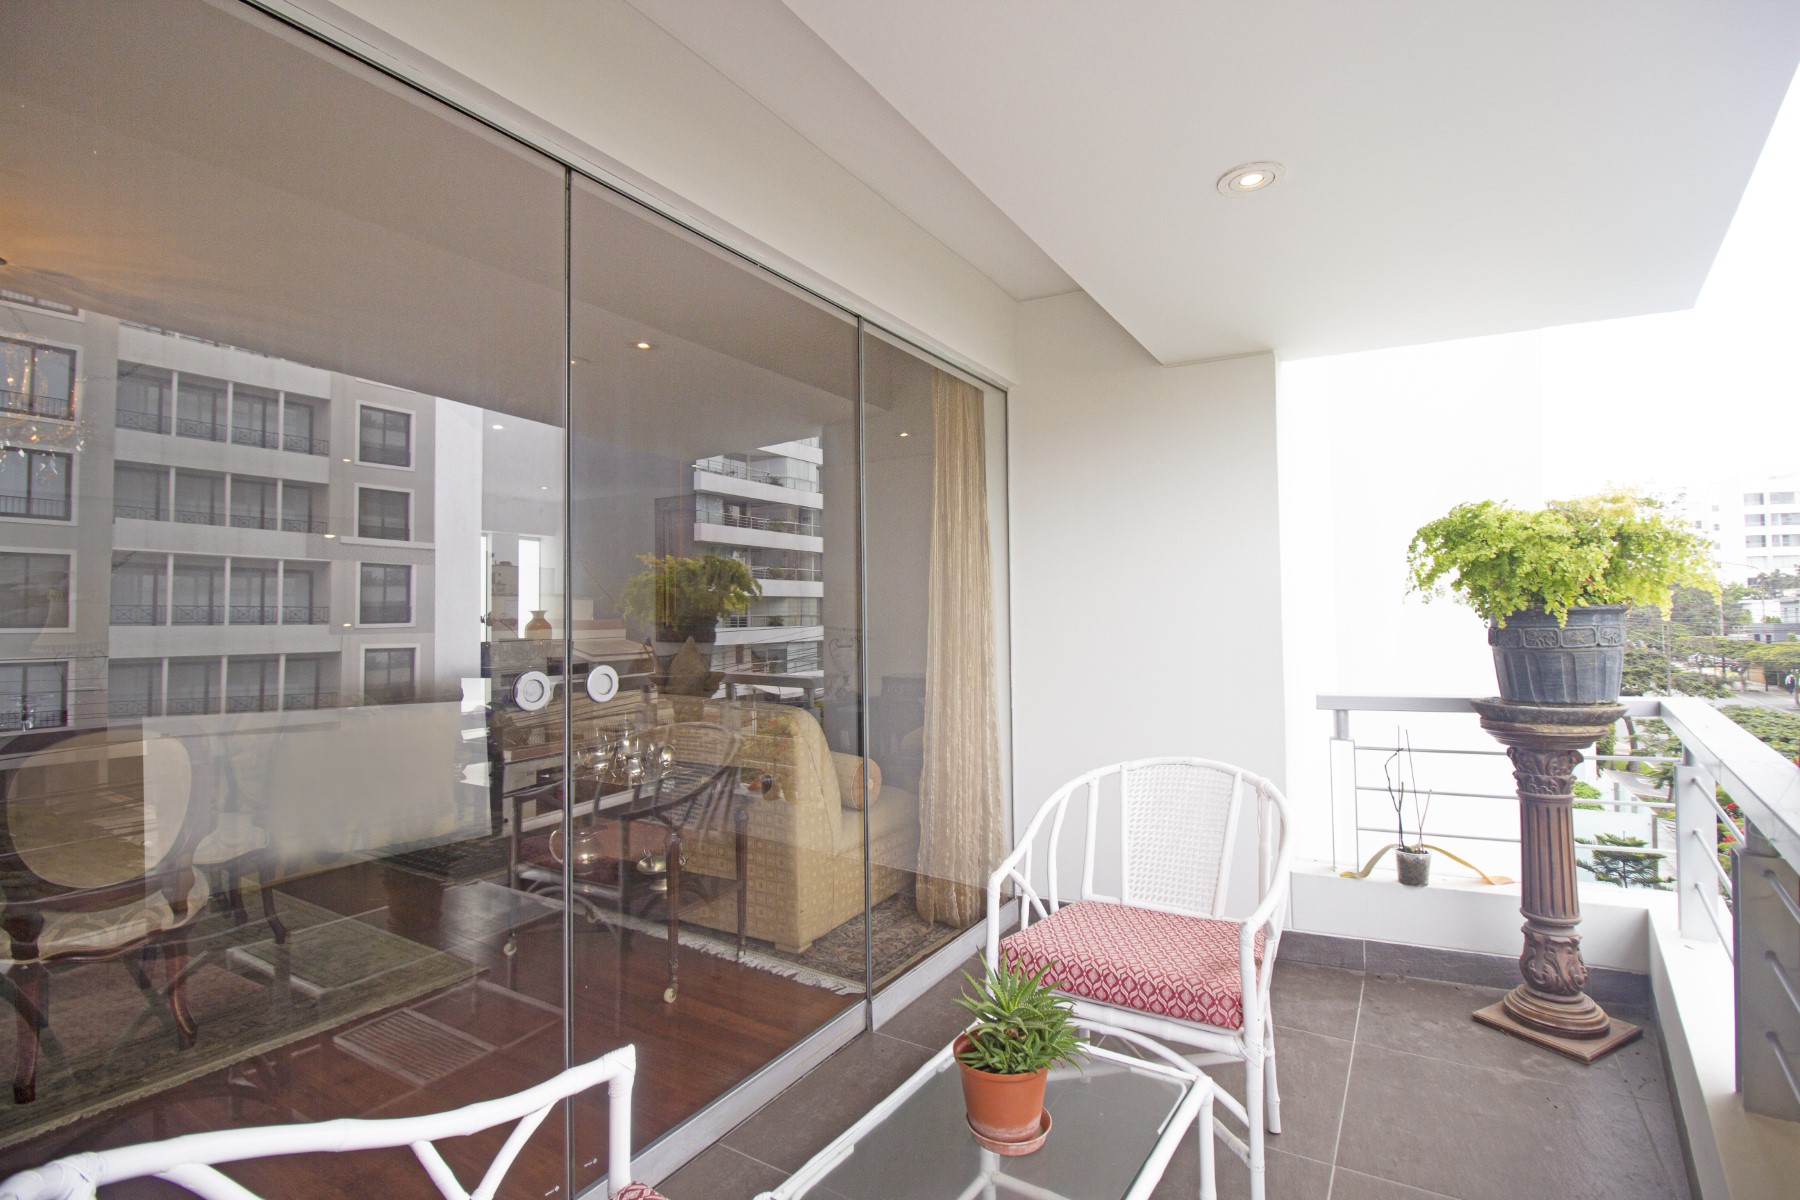 Excellent location in San Isidro, near the golf course, embassies and parks